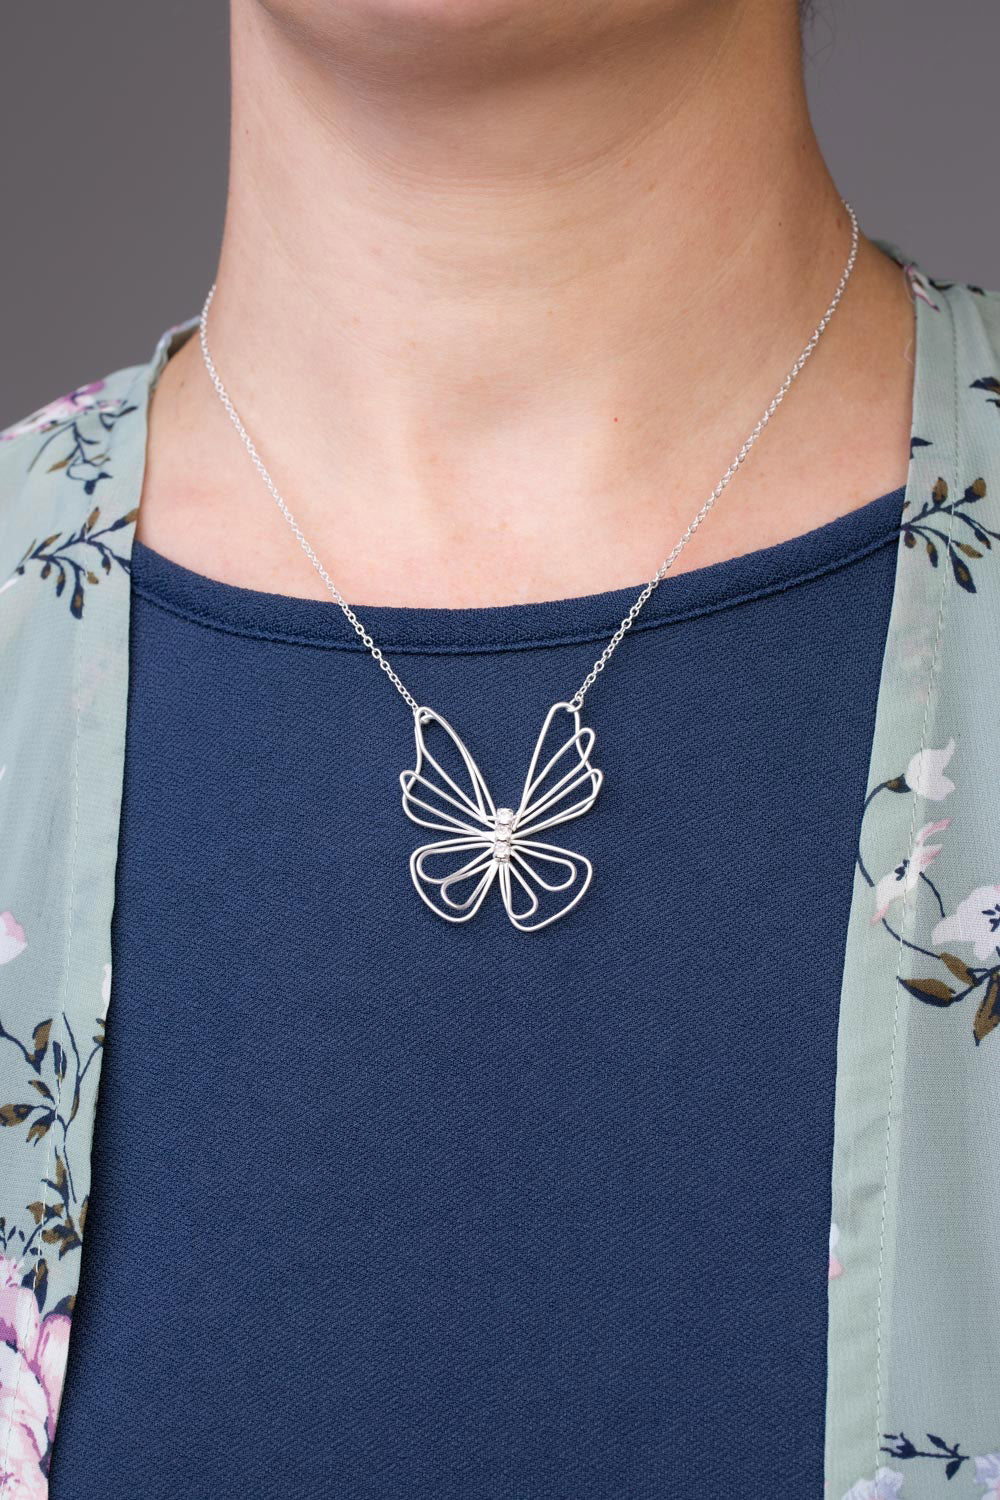 Type 2 Free to Flutter Necklace